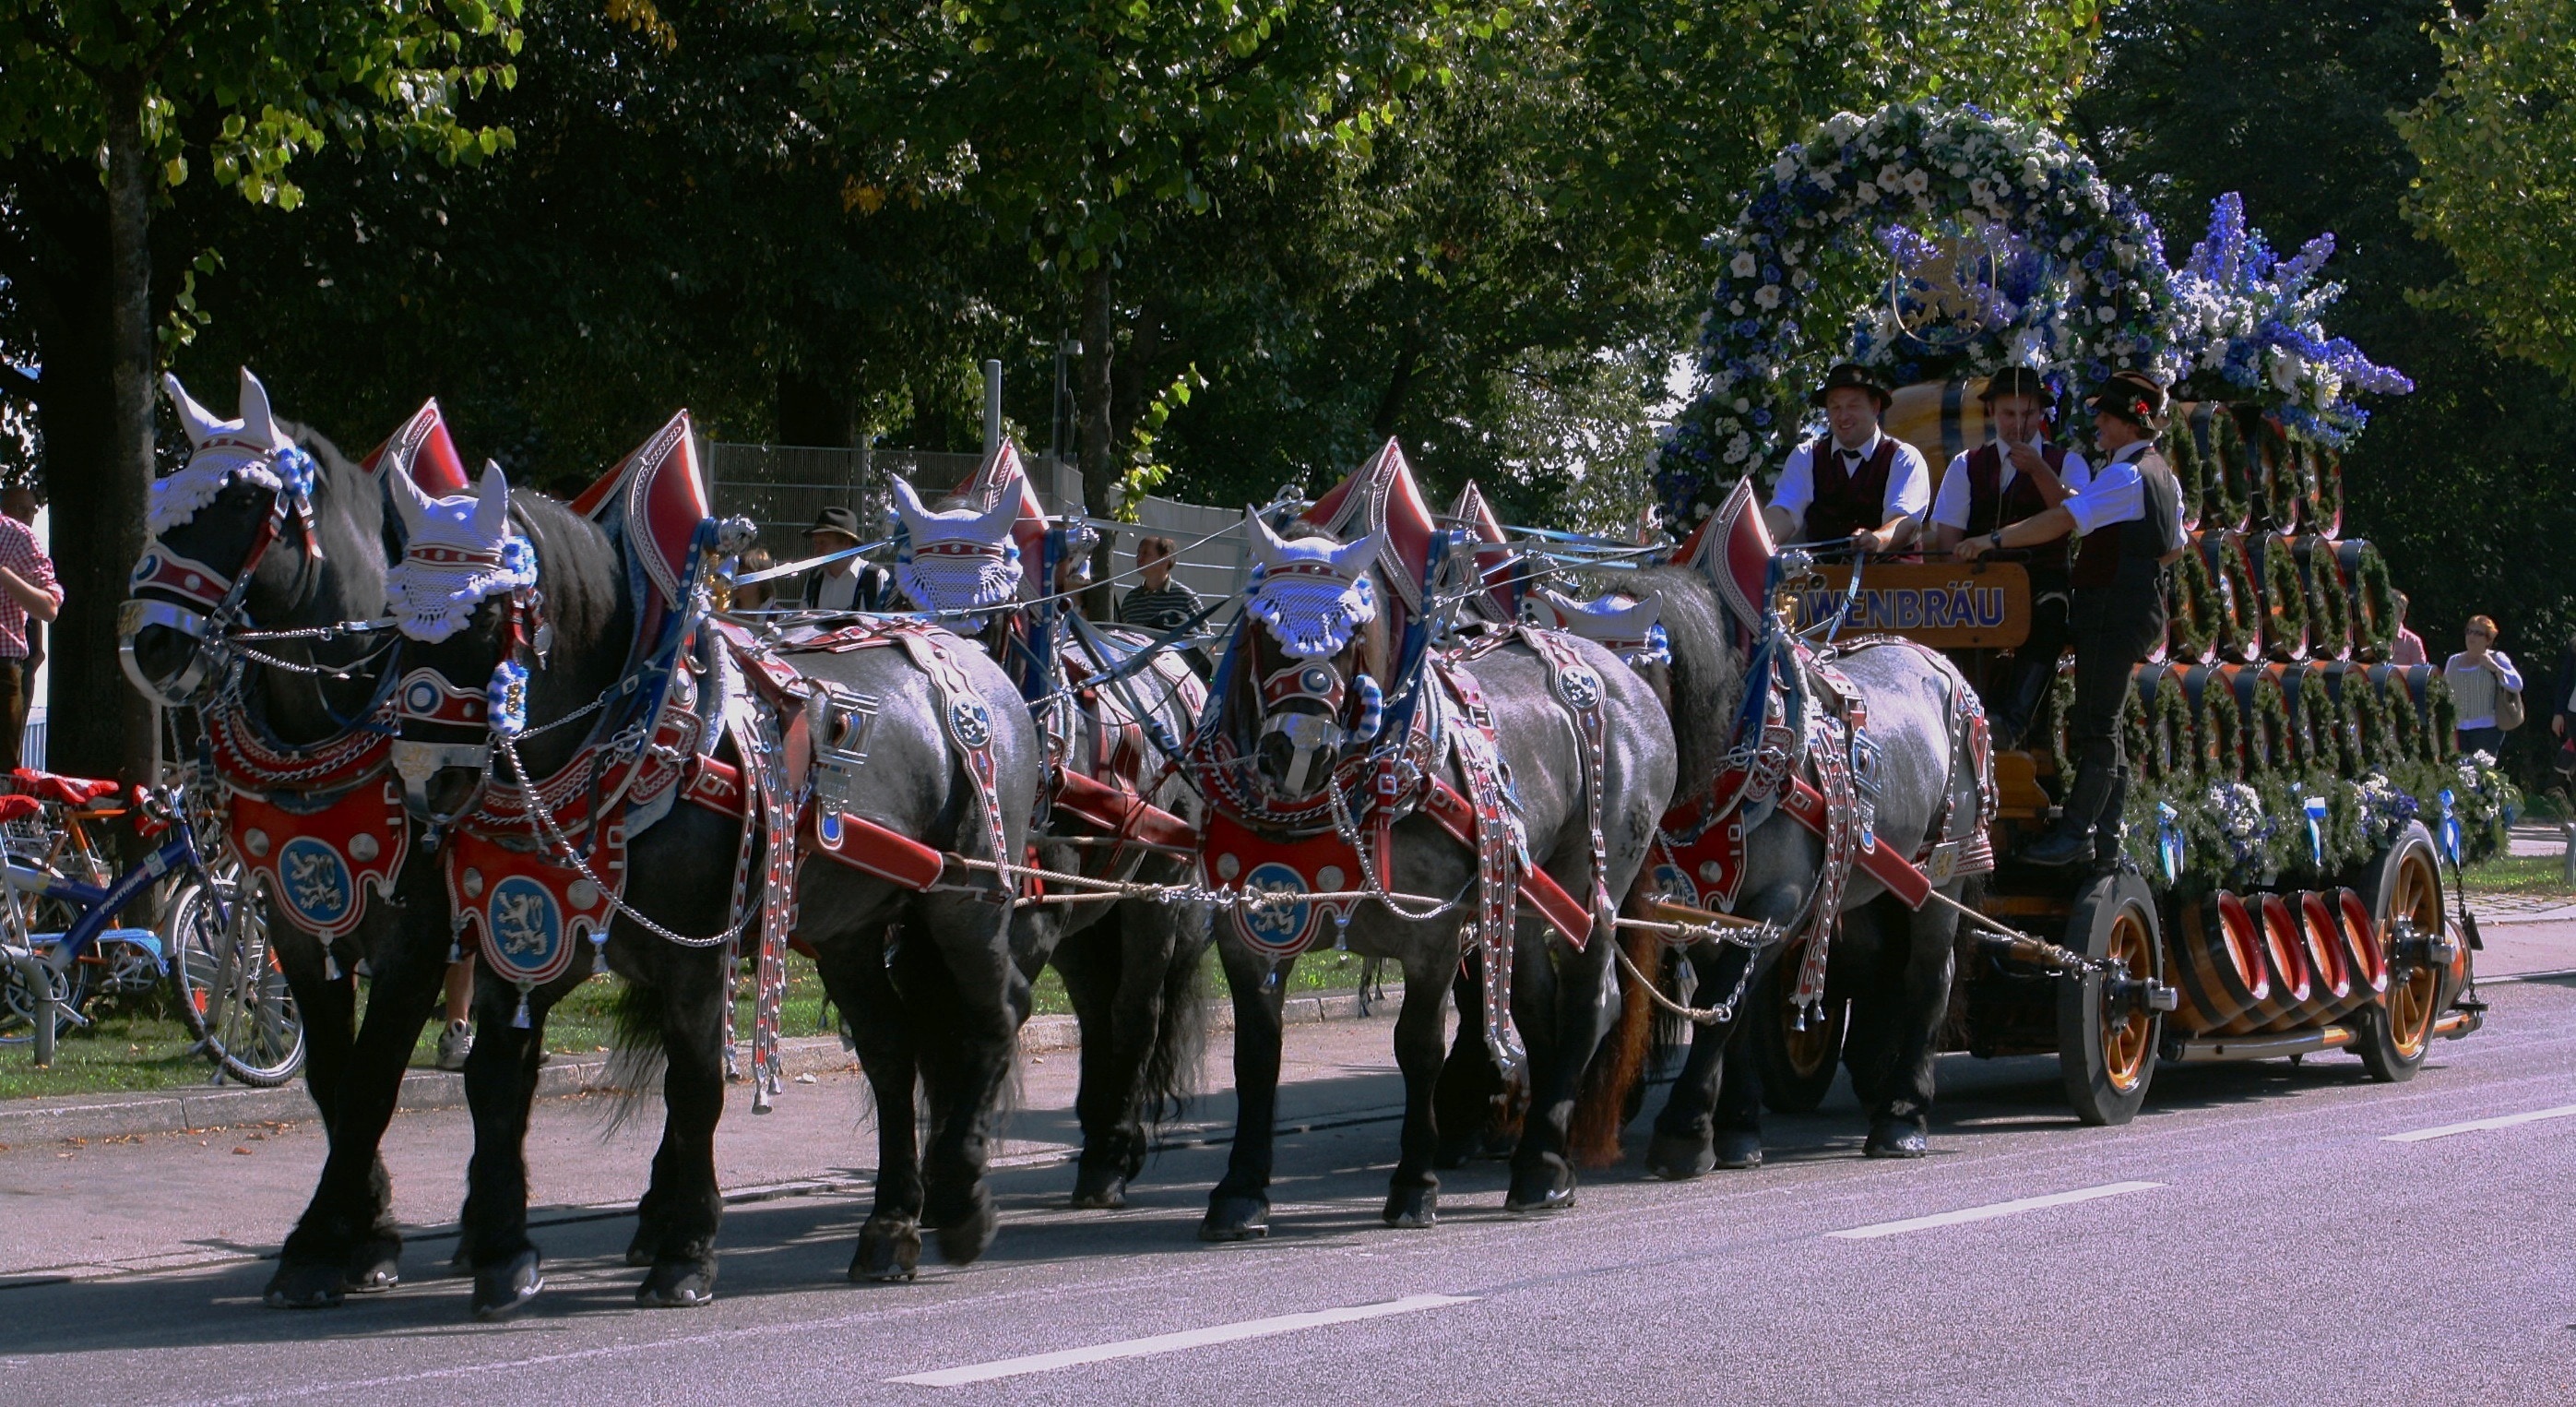 horse carriage parade during daytime